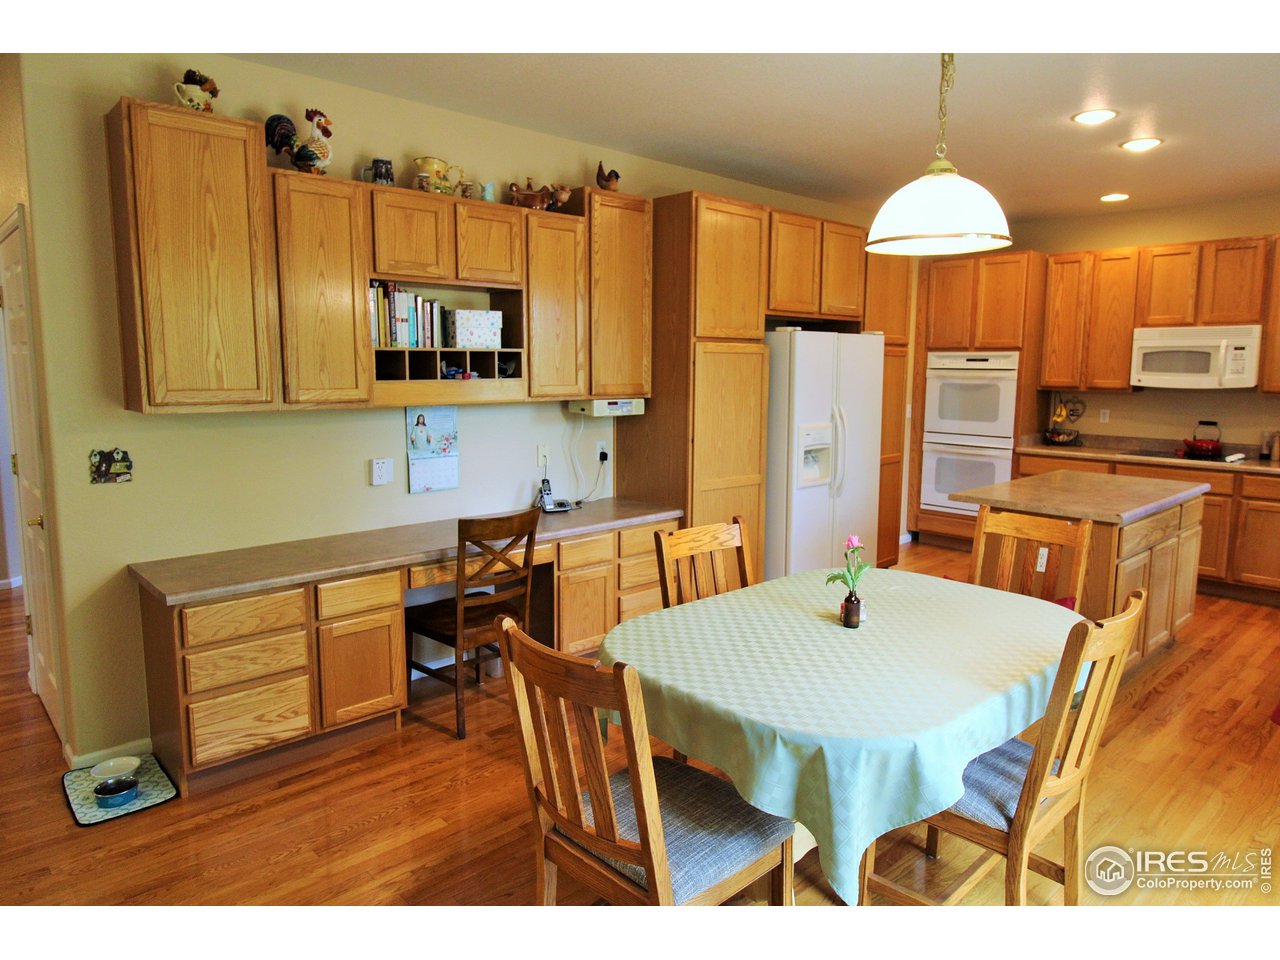 Spacious kitchen with built-in desk / planning area, pantry's, lots of cabinet and counter space.